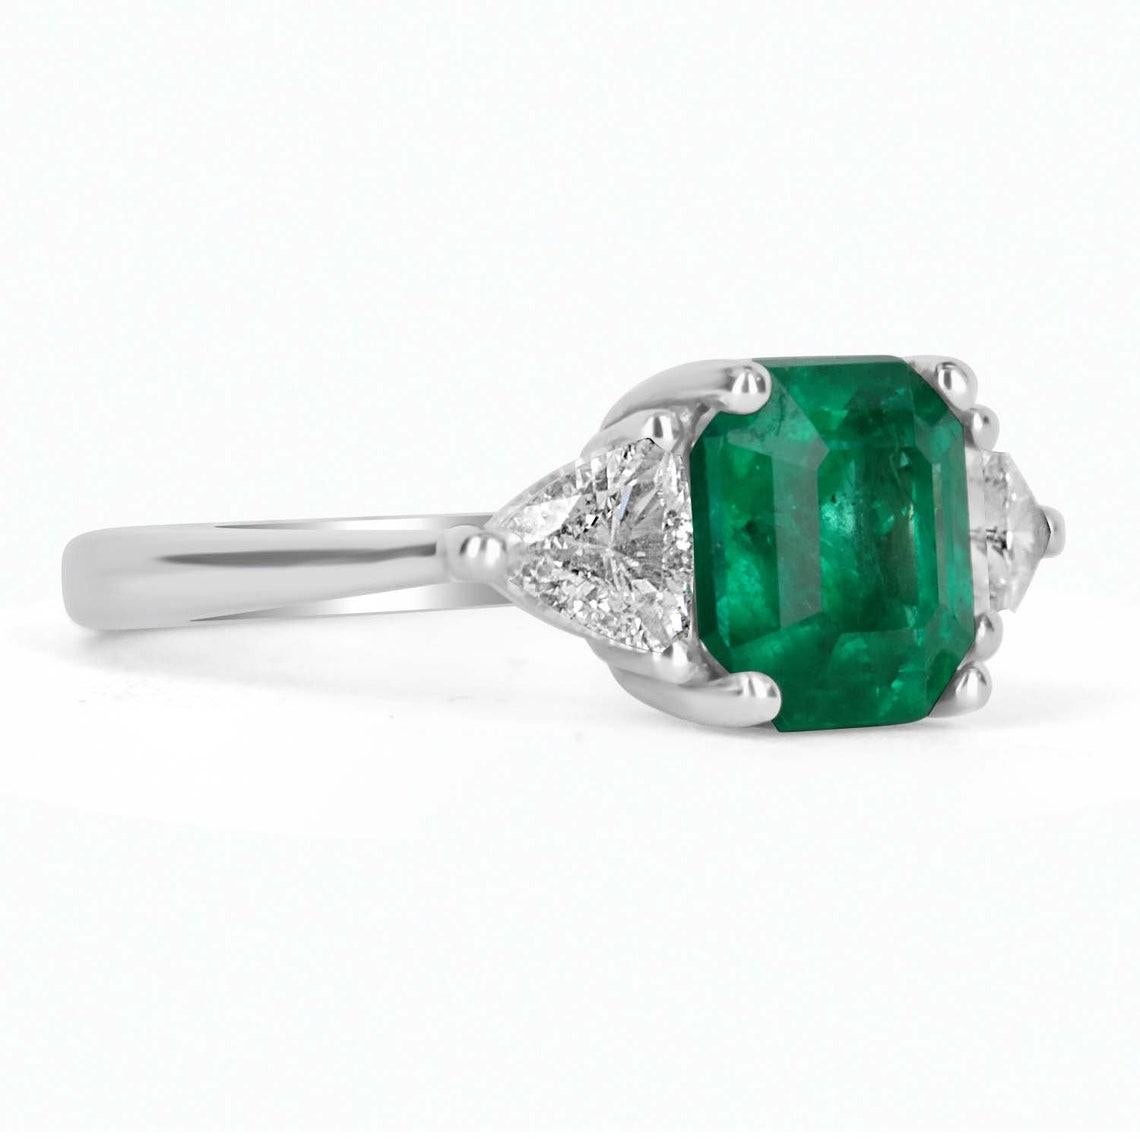 Shower her with love with this Colombian emerald and diamond cocktail ring. An extraordinary custom-created ring. Designed and created by our own master jeweler, 